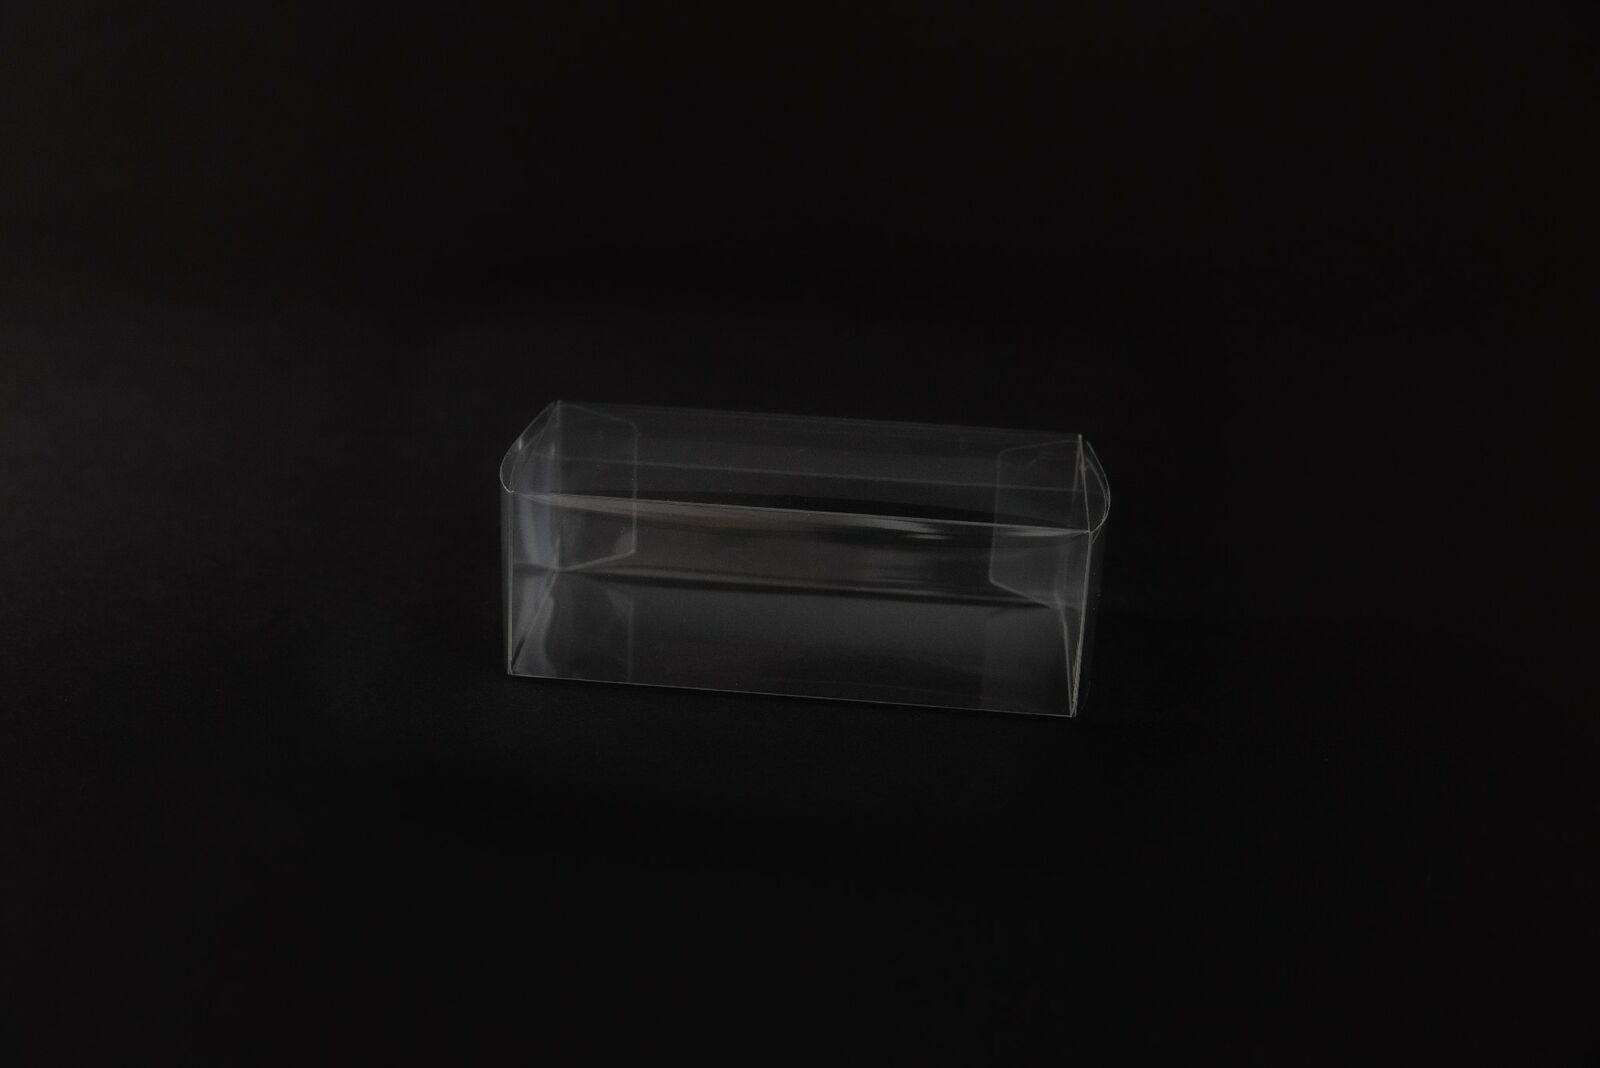 Transparent Packaging Folding Box For Model Cars Scale 1:43 3.94x1.97x1.38 Inch